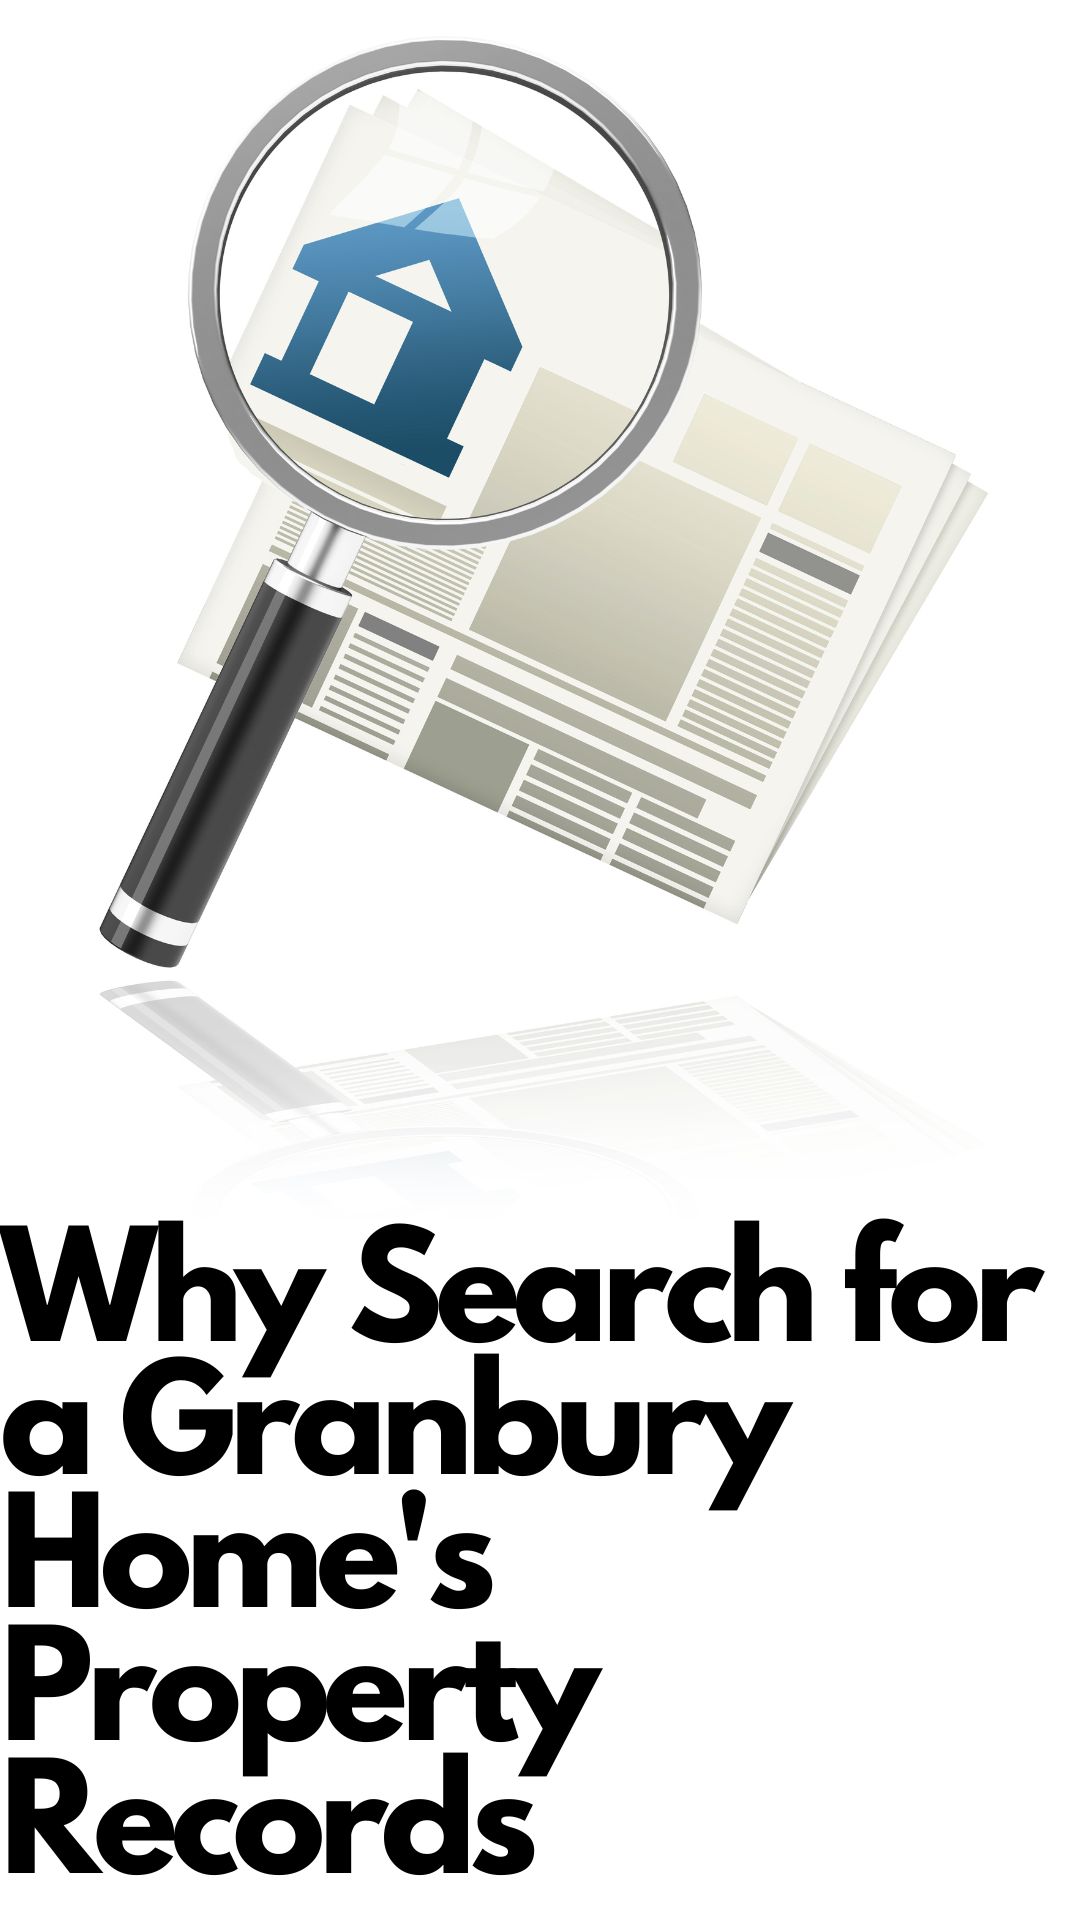 Why Search for a Granbury Home's Property Records